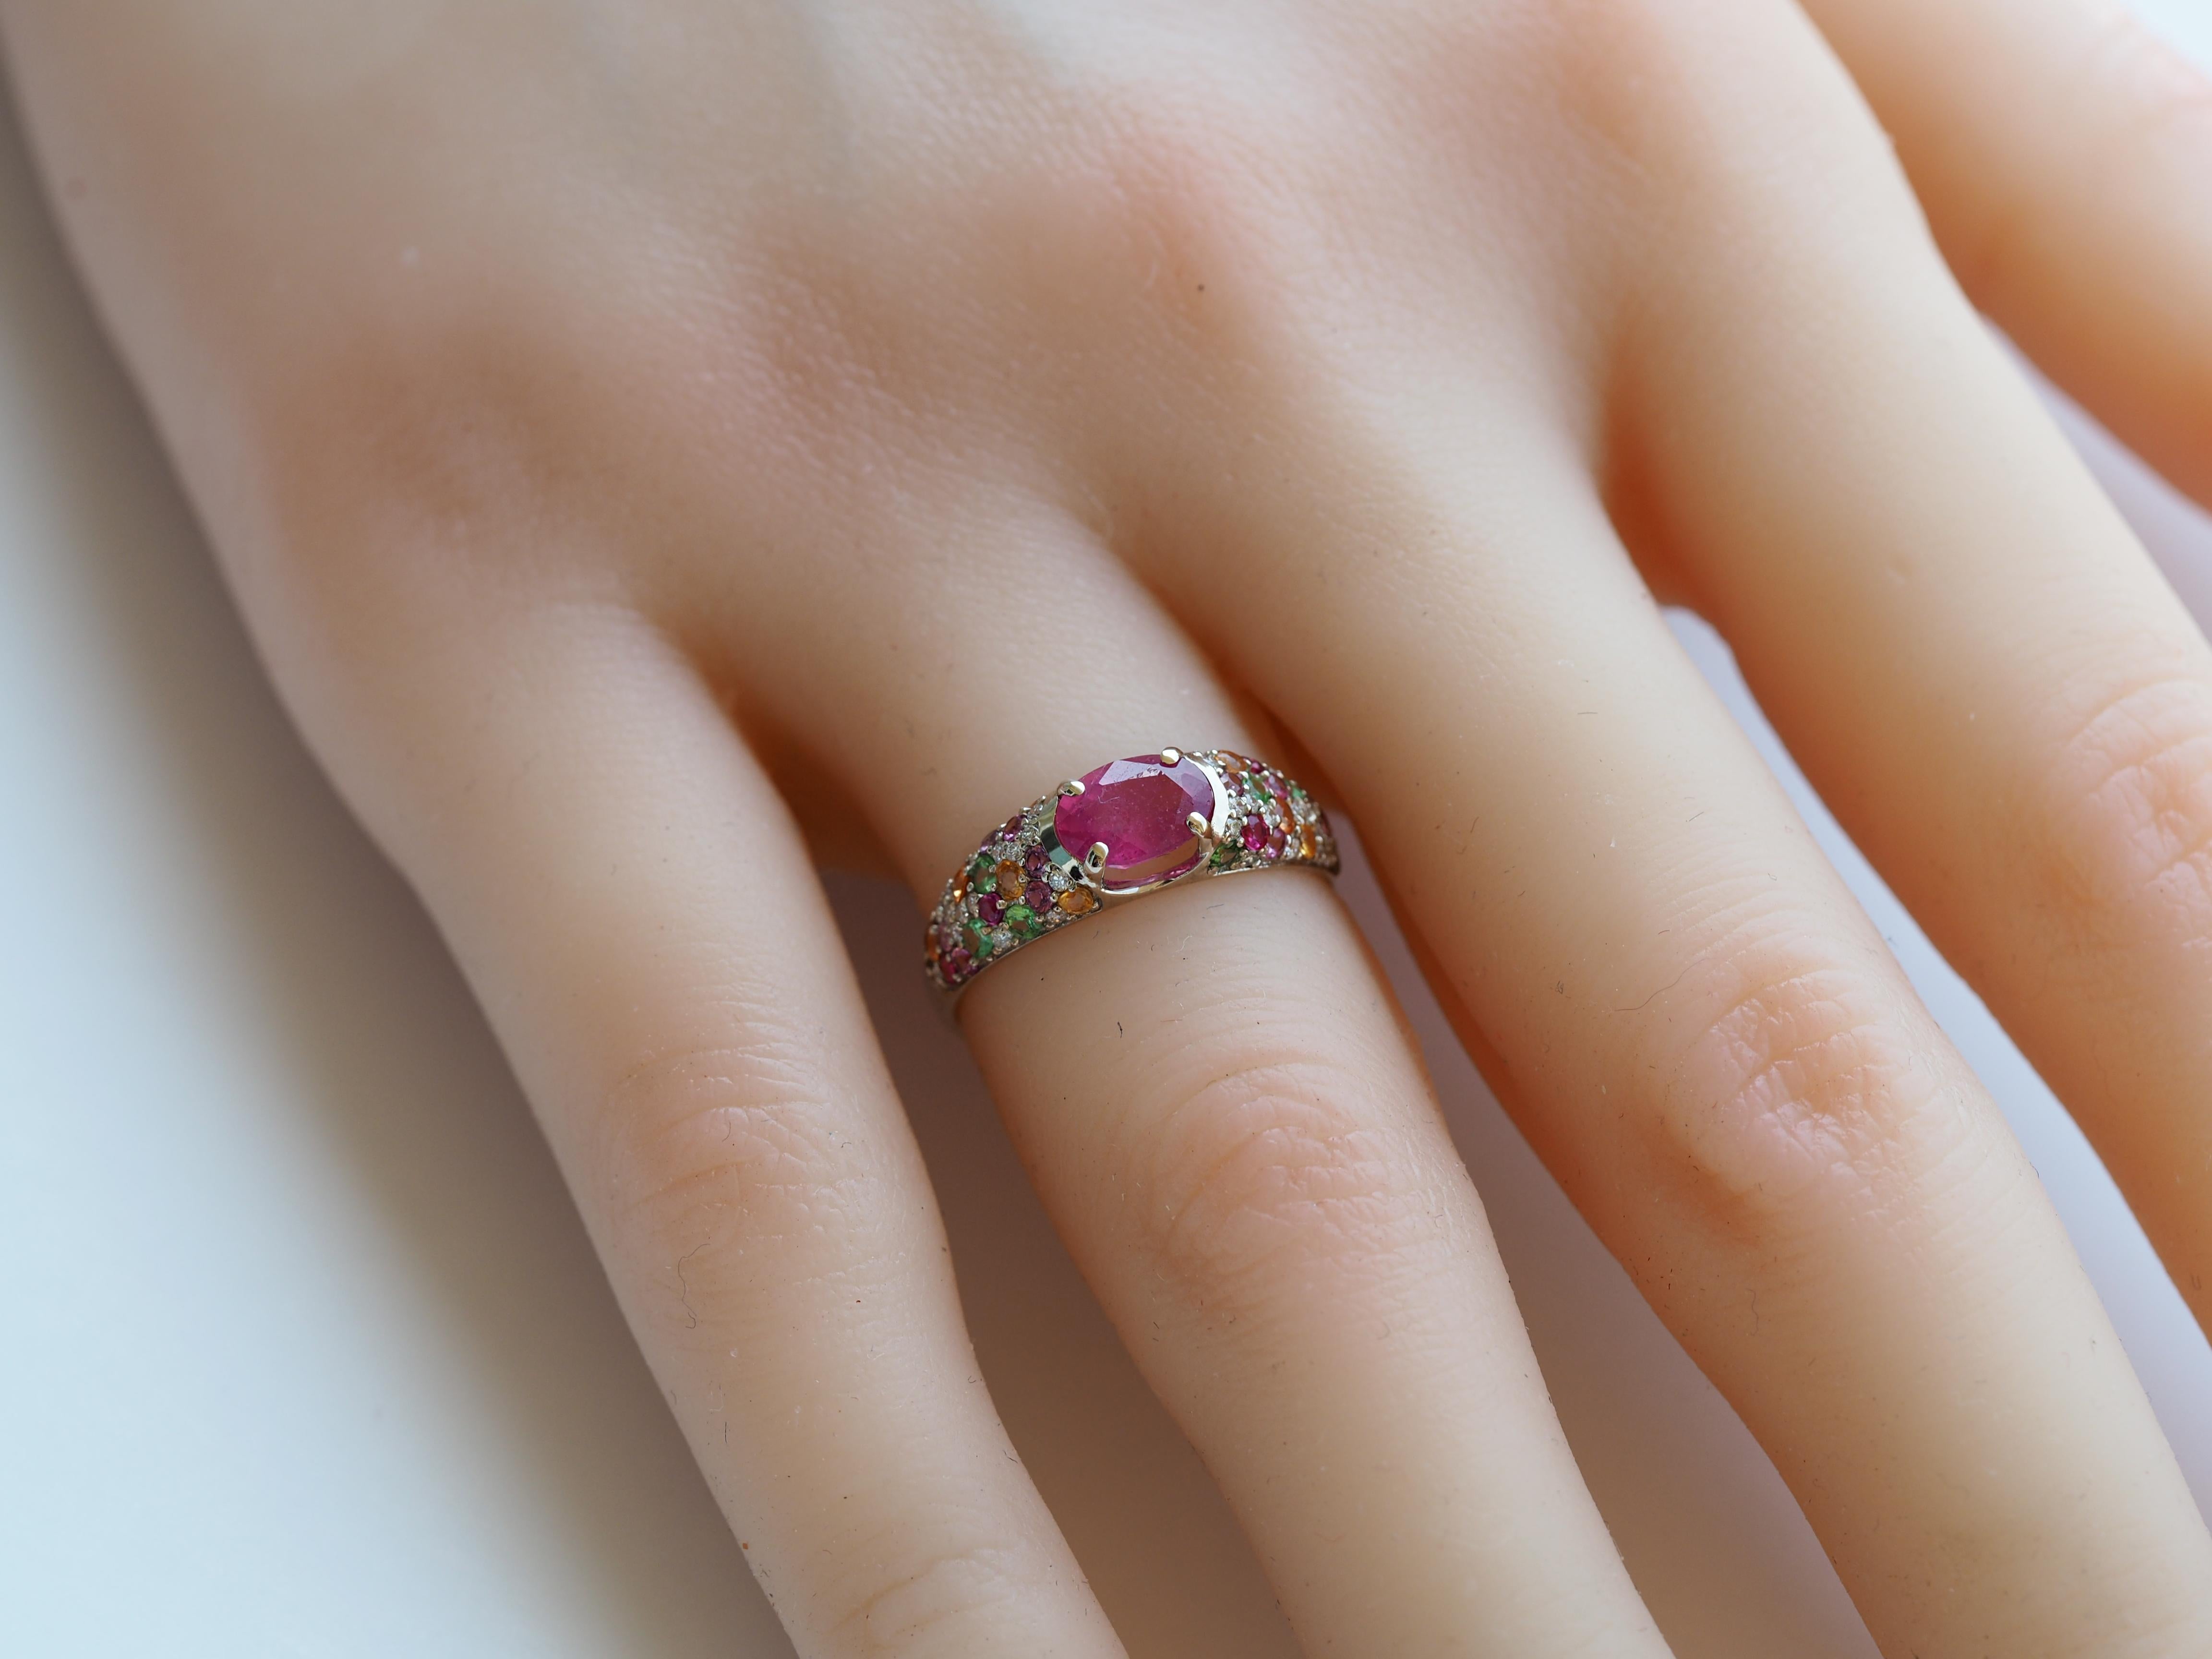 For Sale:  14k gold ruby and multicolored gemstones ring. 9